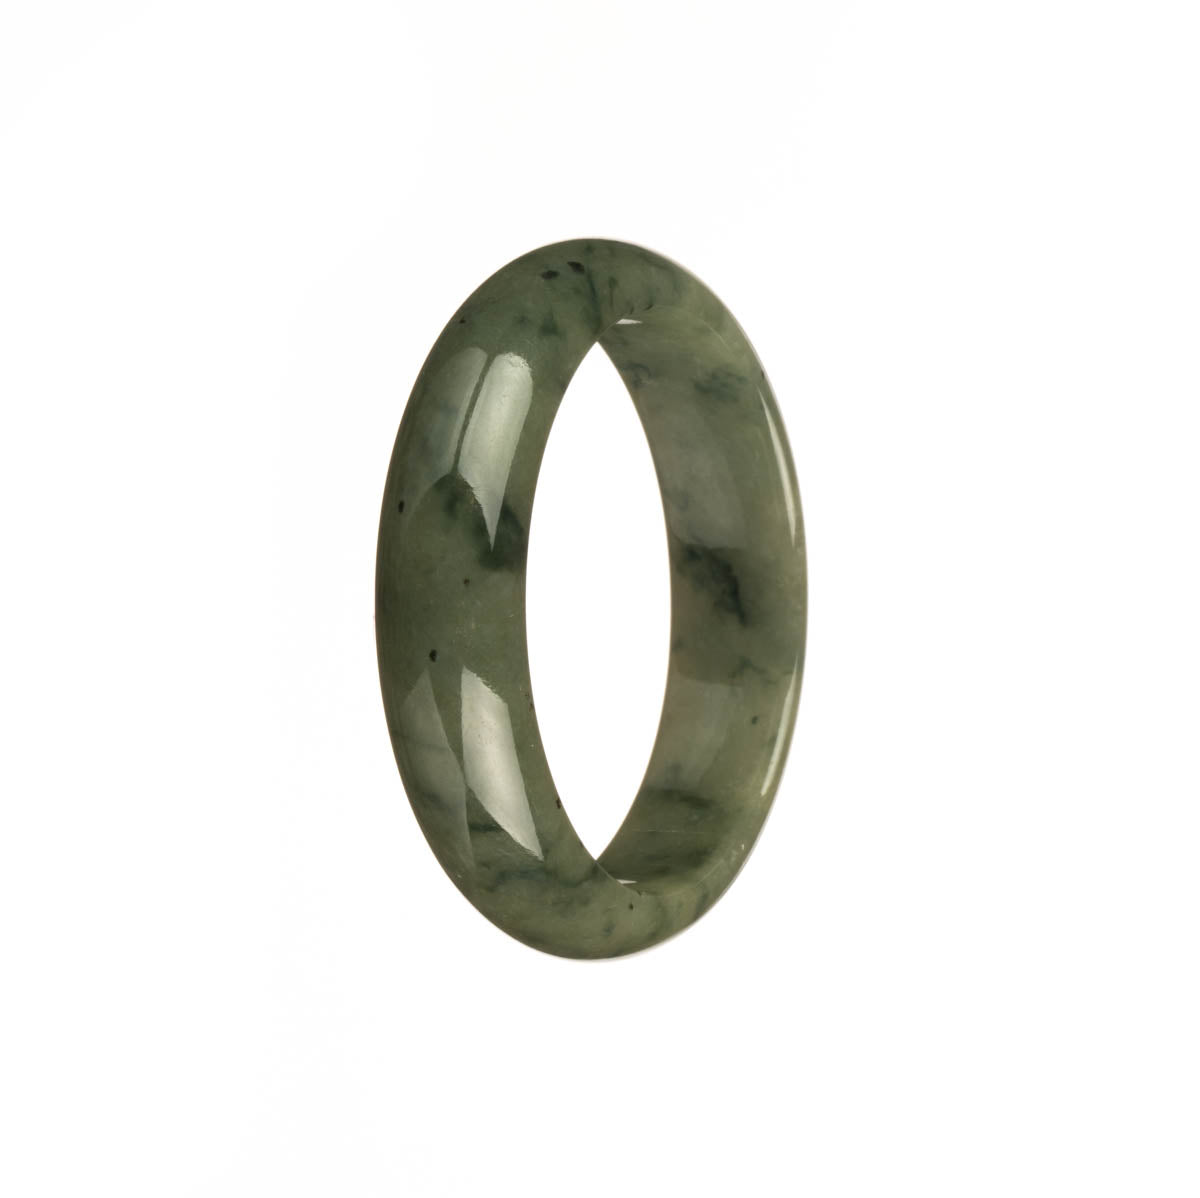 A beautiful half moon shaped jadeite jade bangle with genuine Type A green color and dark green patterns. Perfect for adding a touch of elegance to any outfit.